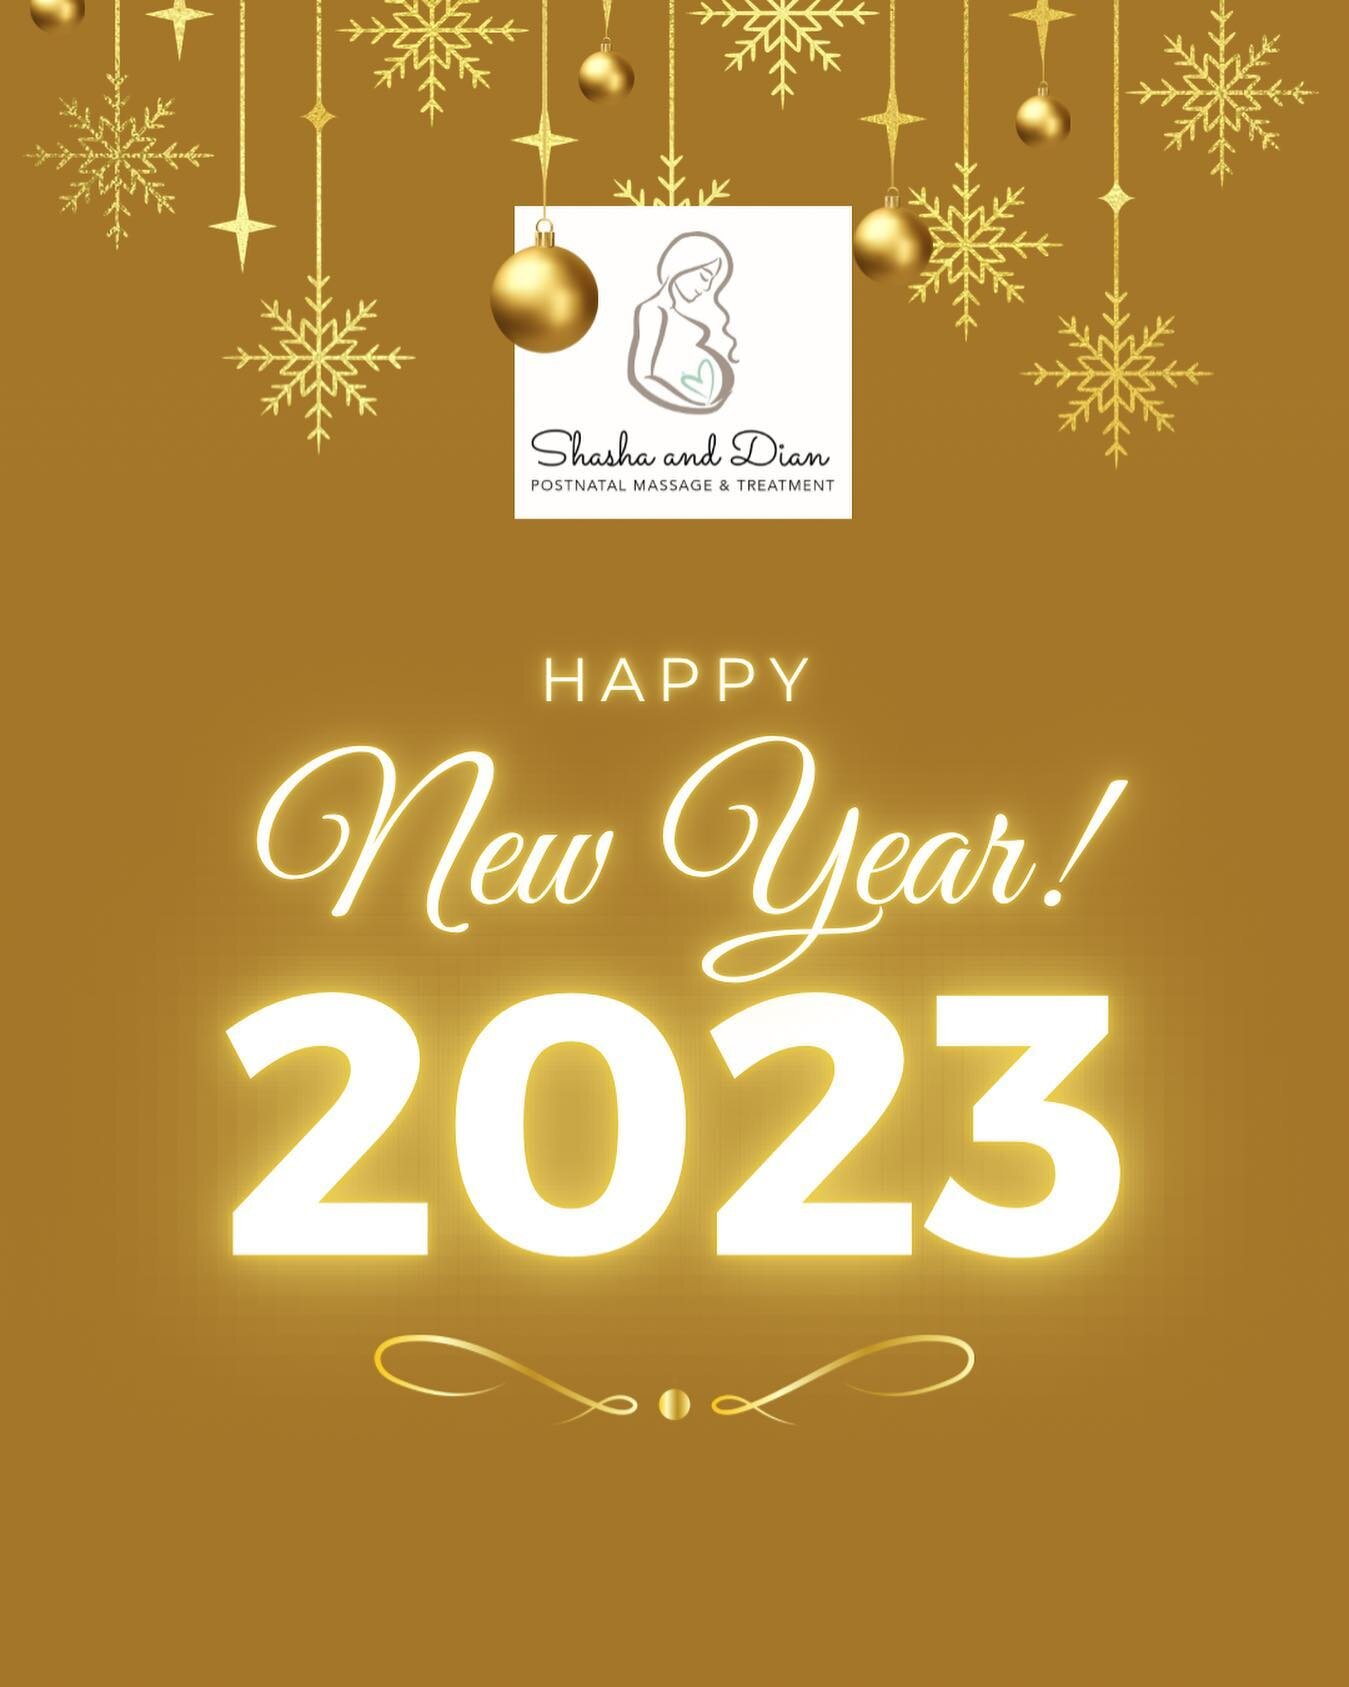 Happy New Year to all our beloved clients! Thank you for your support, it means so much to us. Wishing you a year filled with joy, success and prosperity.